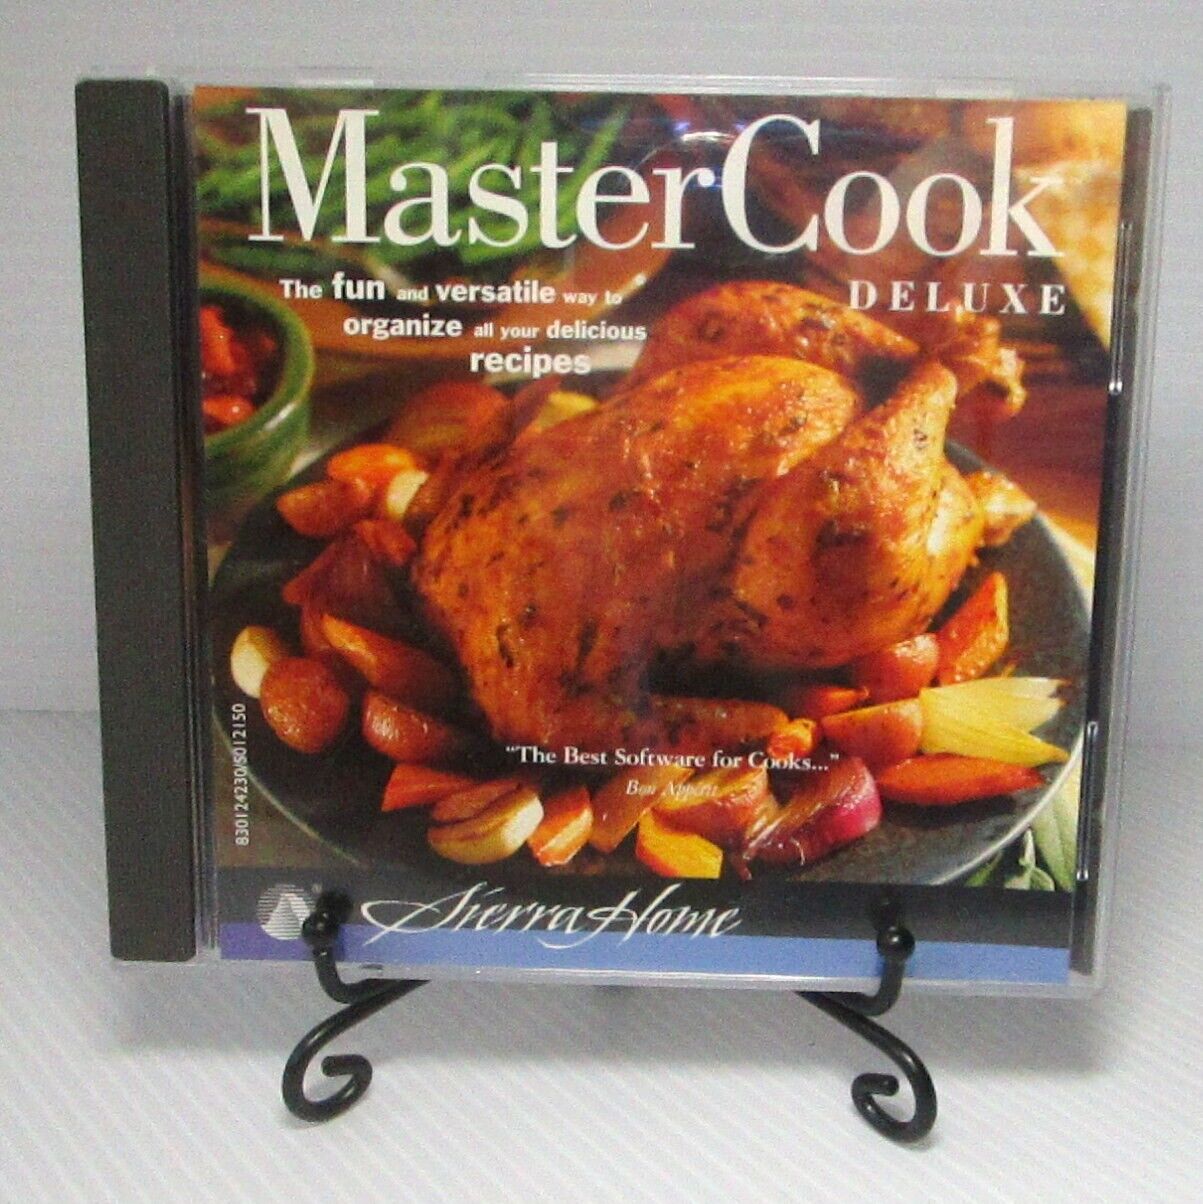 Master Cook Deluxe Version 4.0 CD-ROM 1996 from Sierra Home by Sierra On-Line